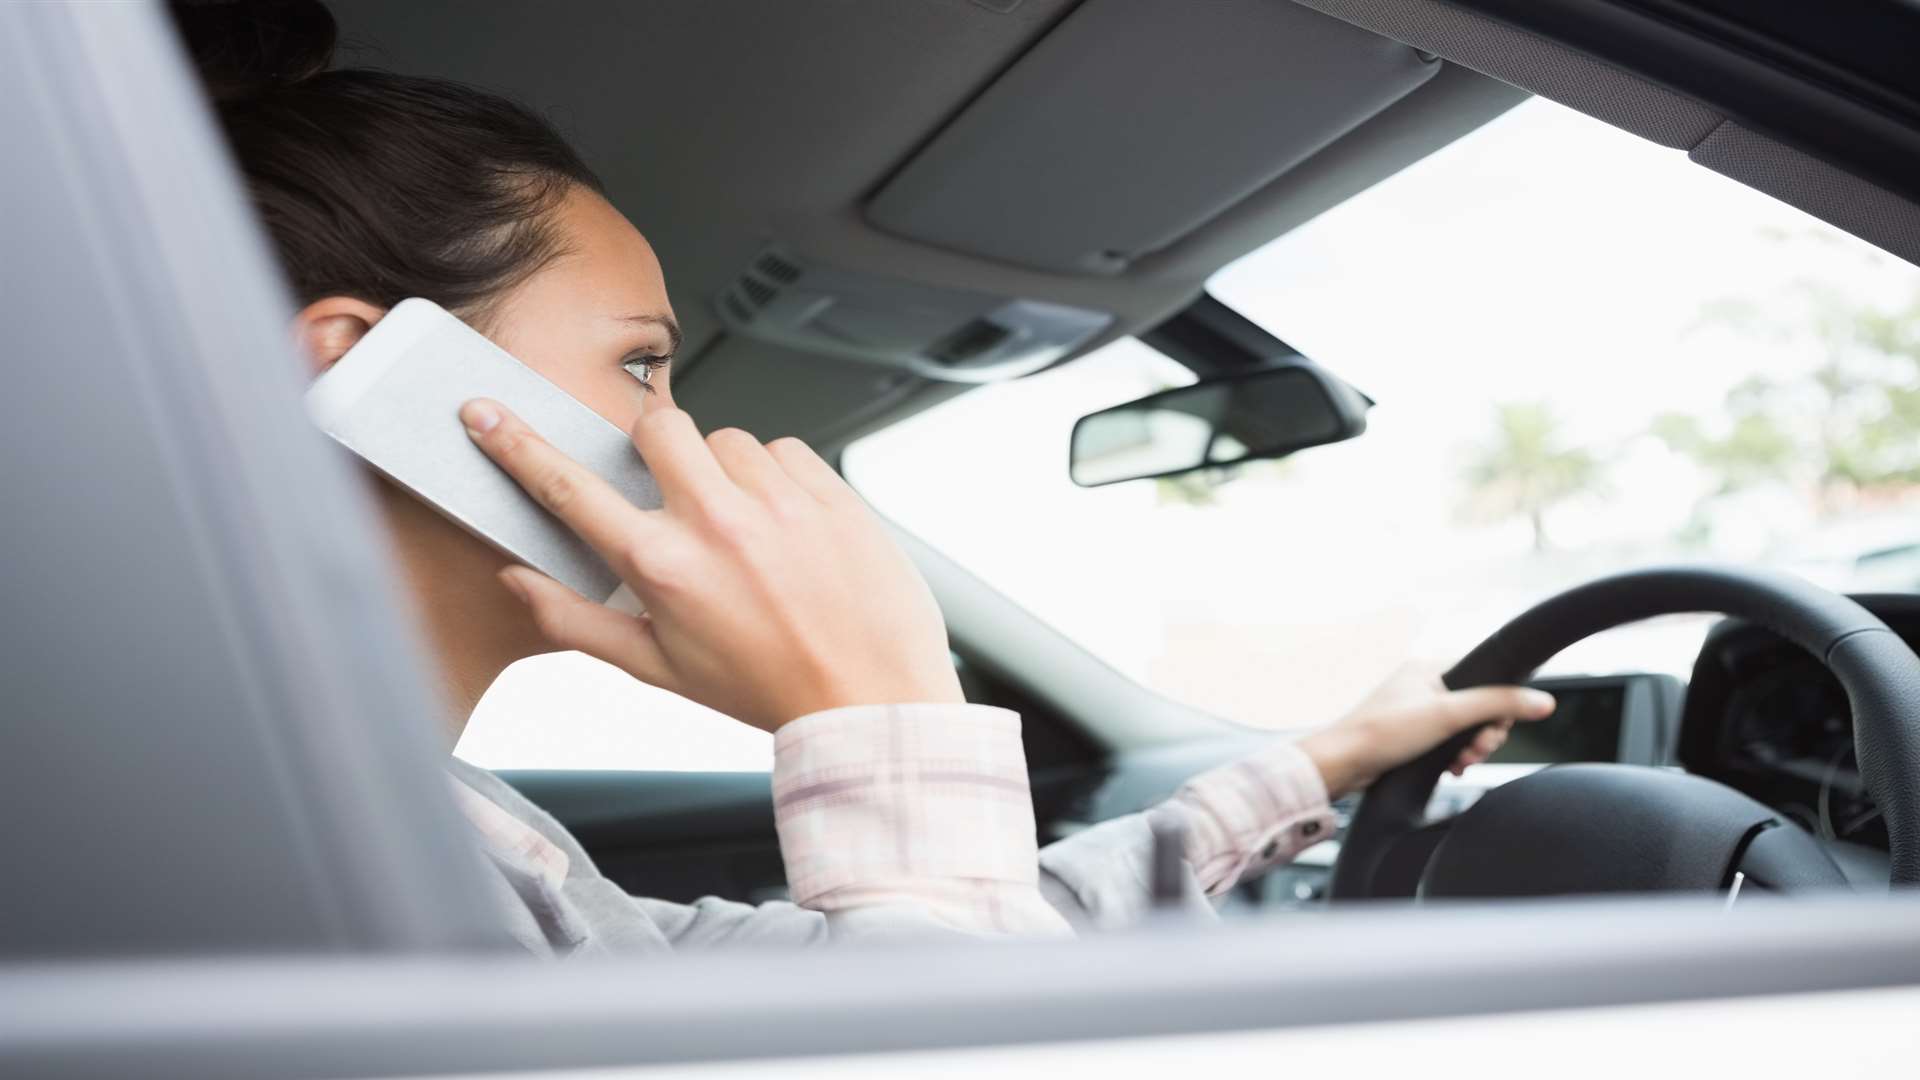 Police are fining fewer people for using phones while driving